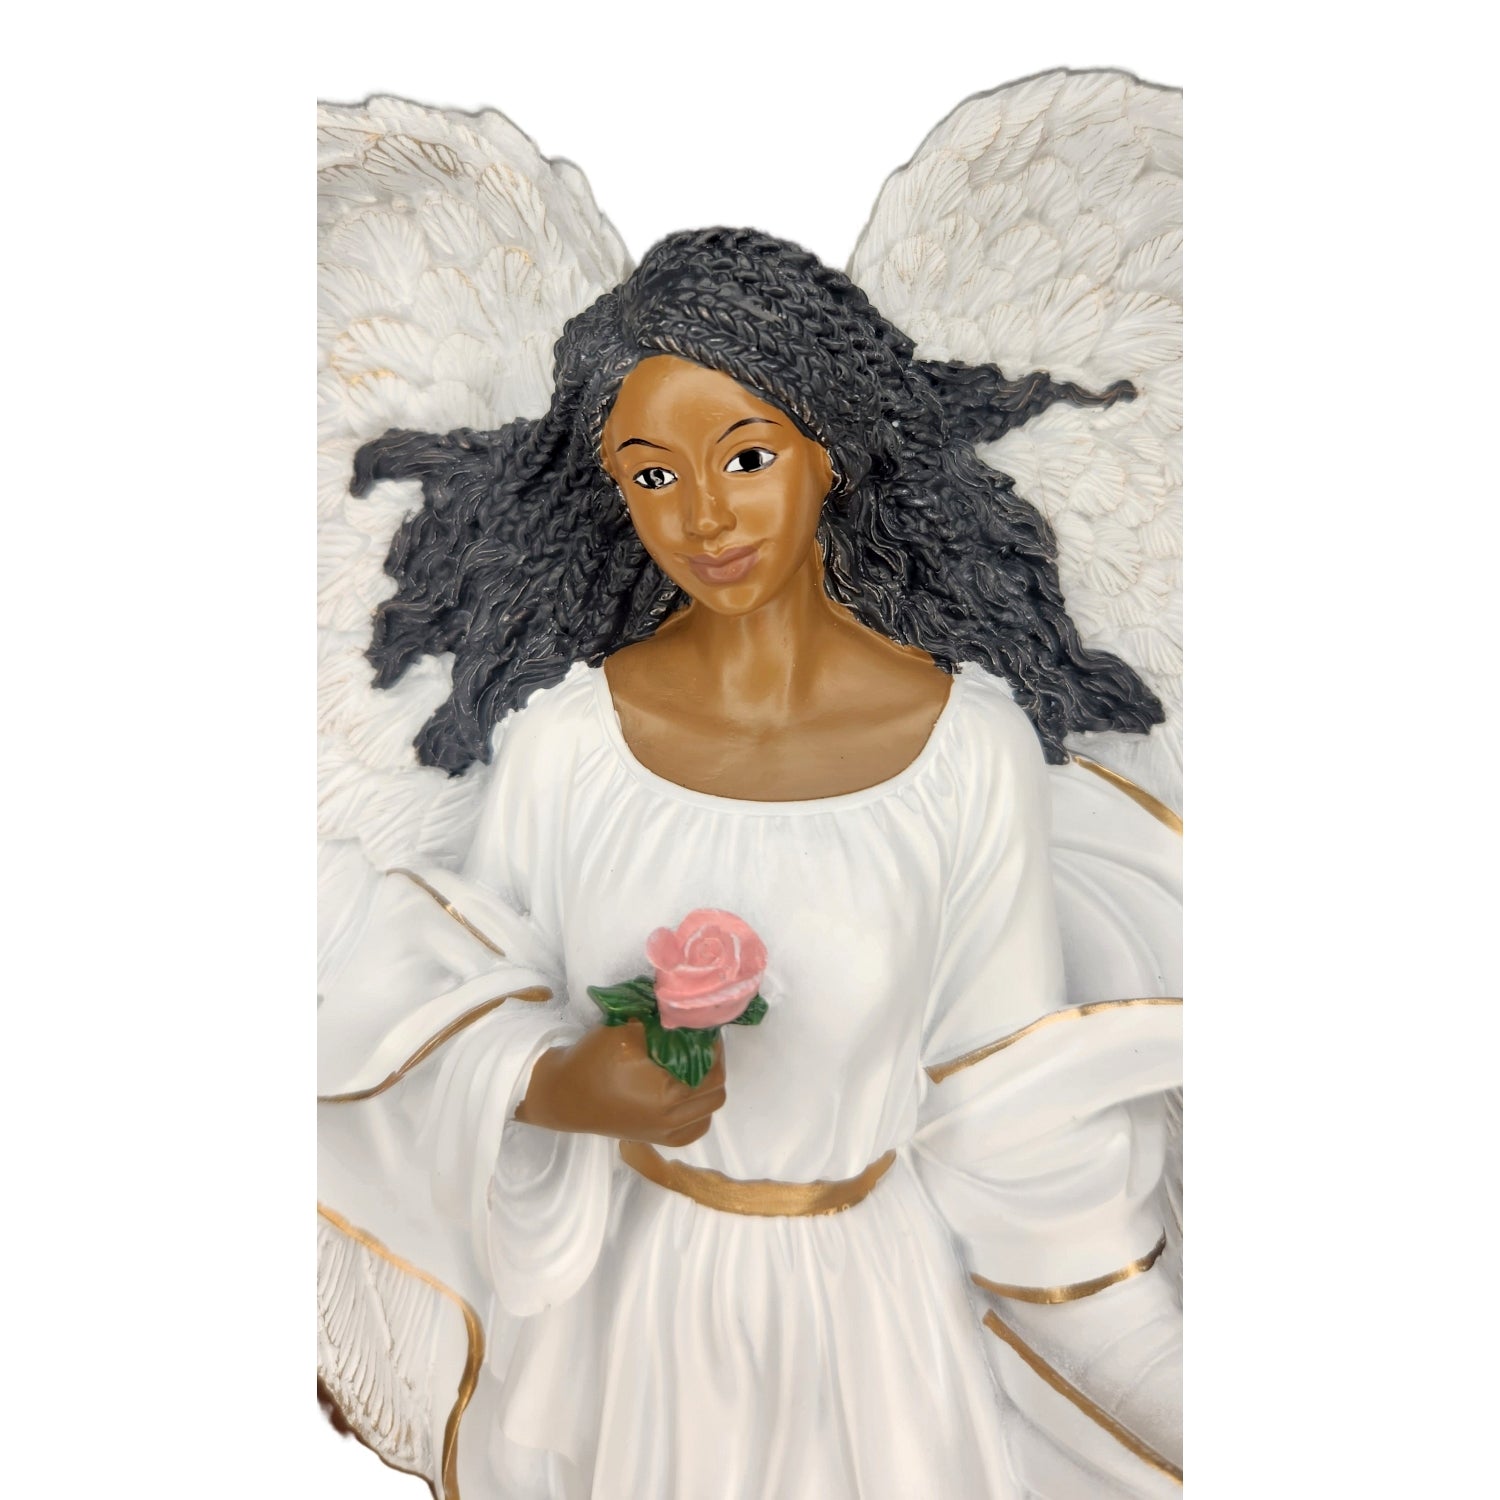 5 of 6: Graceful African American Angel in White with Rose Figurine